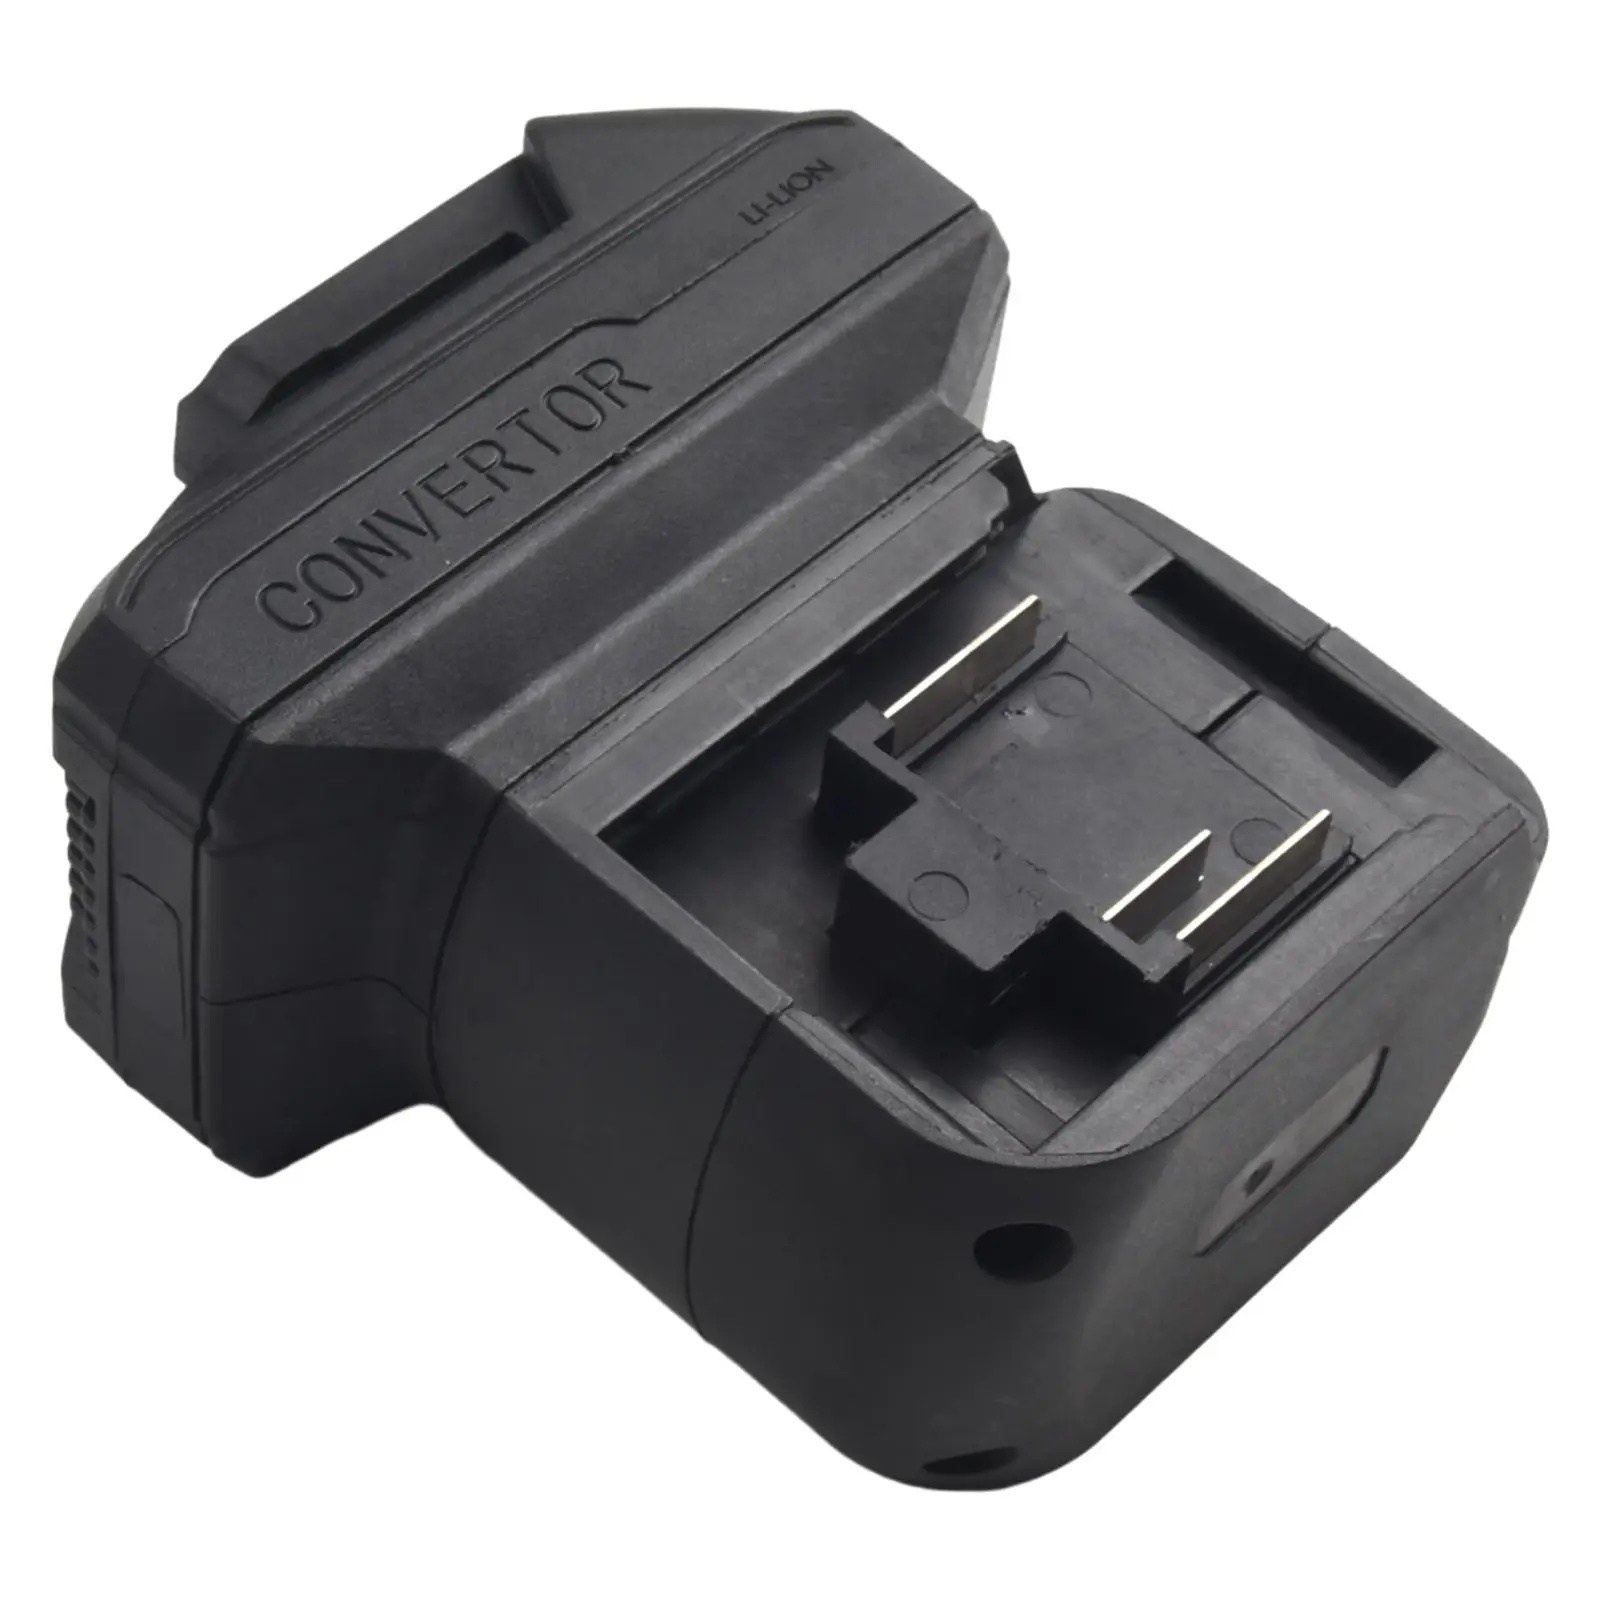 1pc Power Battery Adapter Battery Converter For Maki-Ta Impact Drill Wrench Screwdrivers Worklight Power Tool Accessories